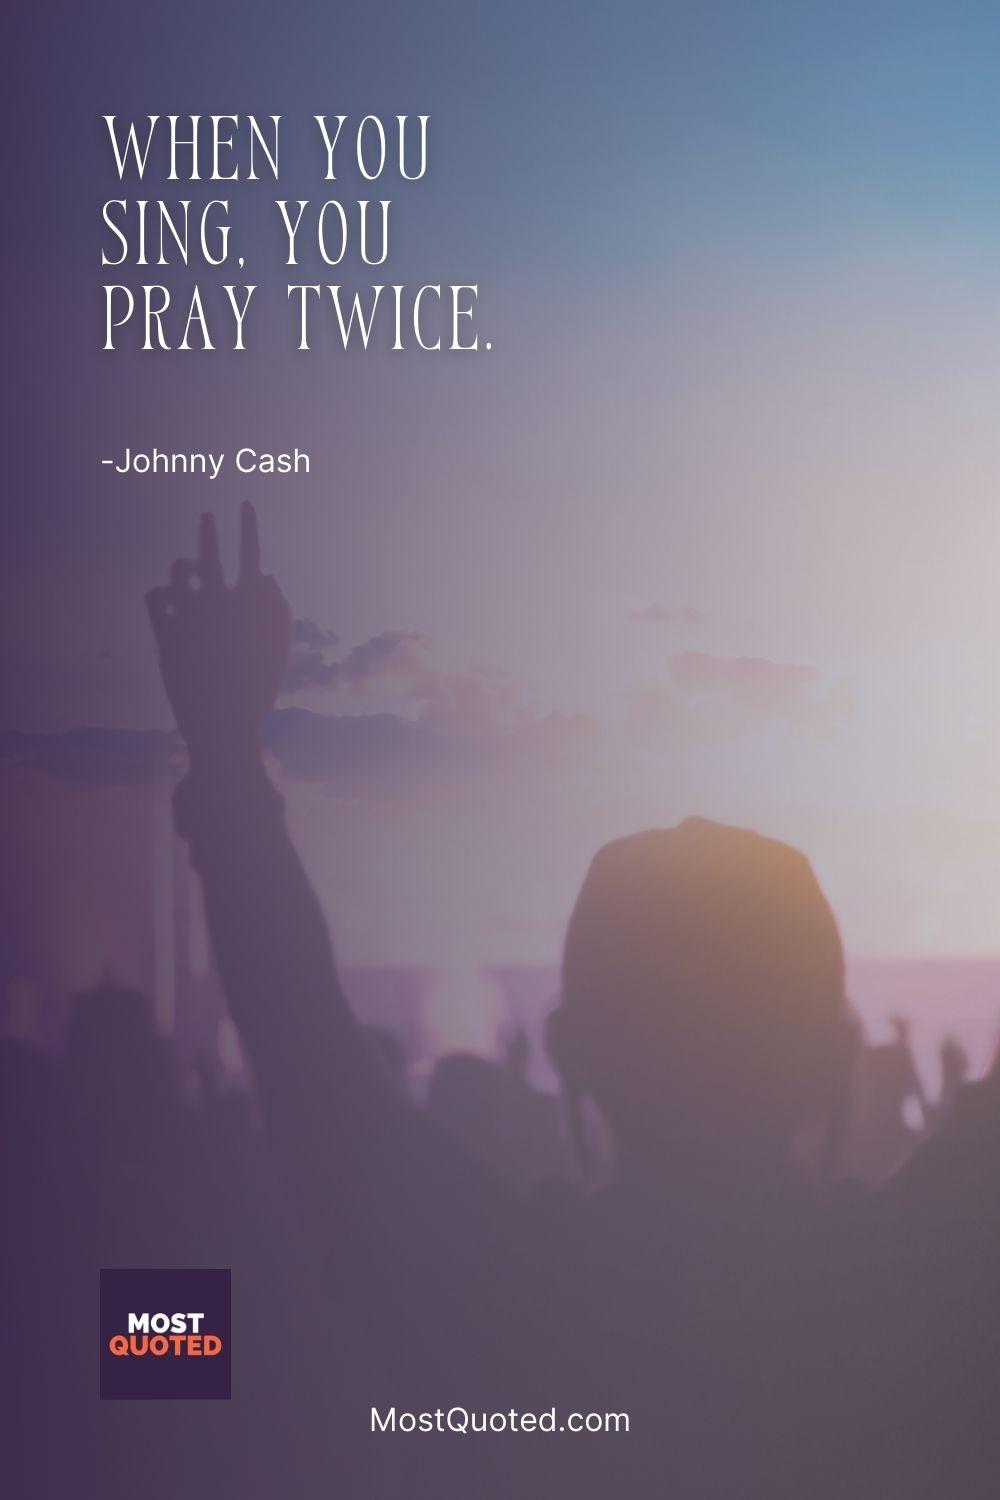 When you sing, you pray twice. - Johnny Cash